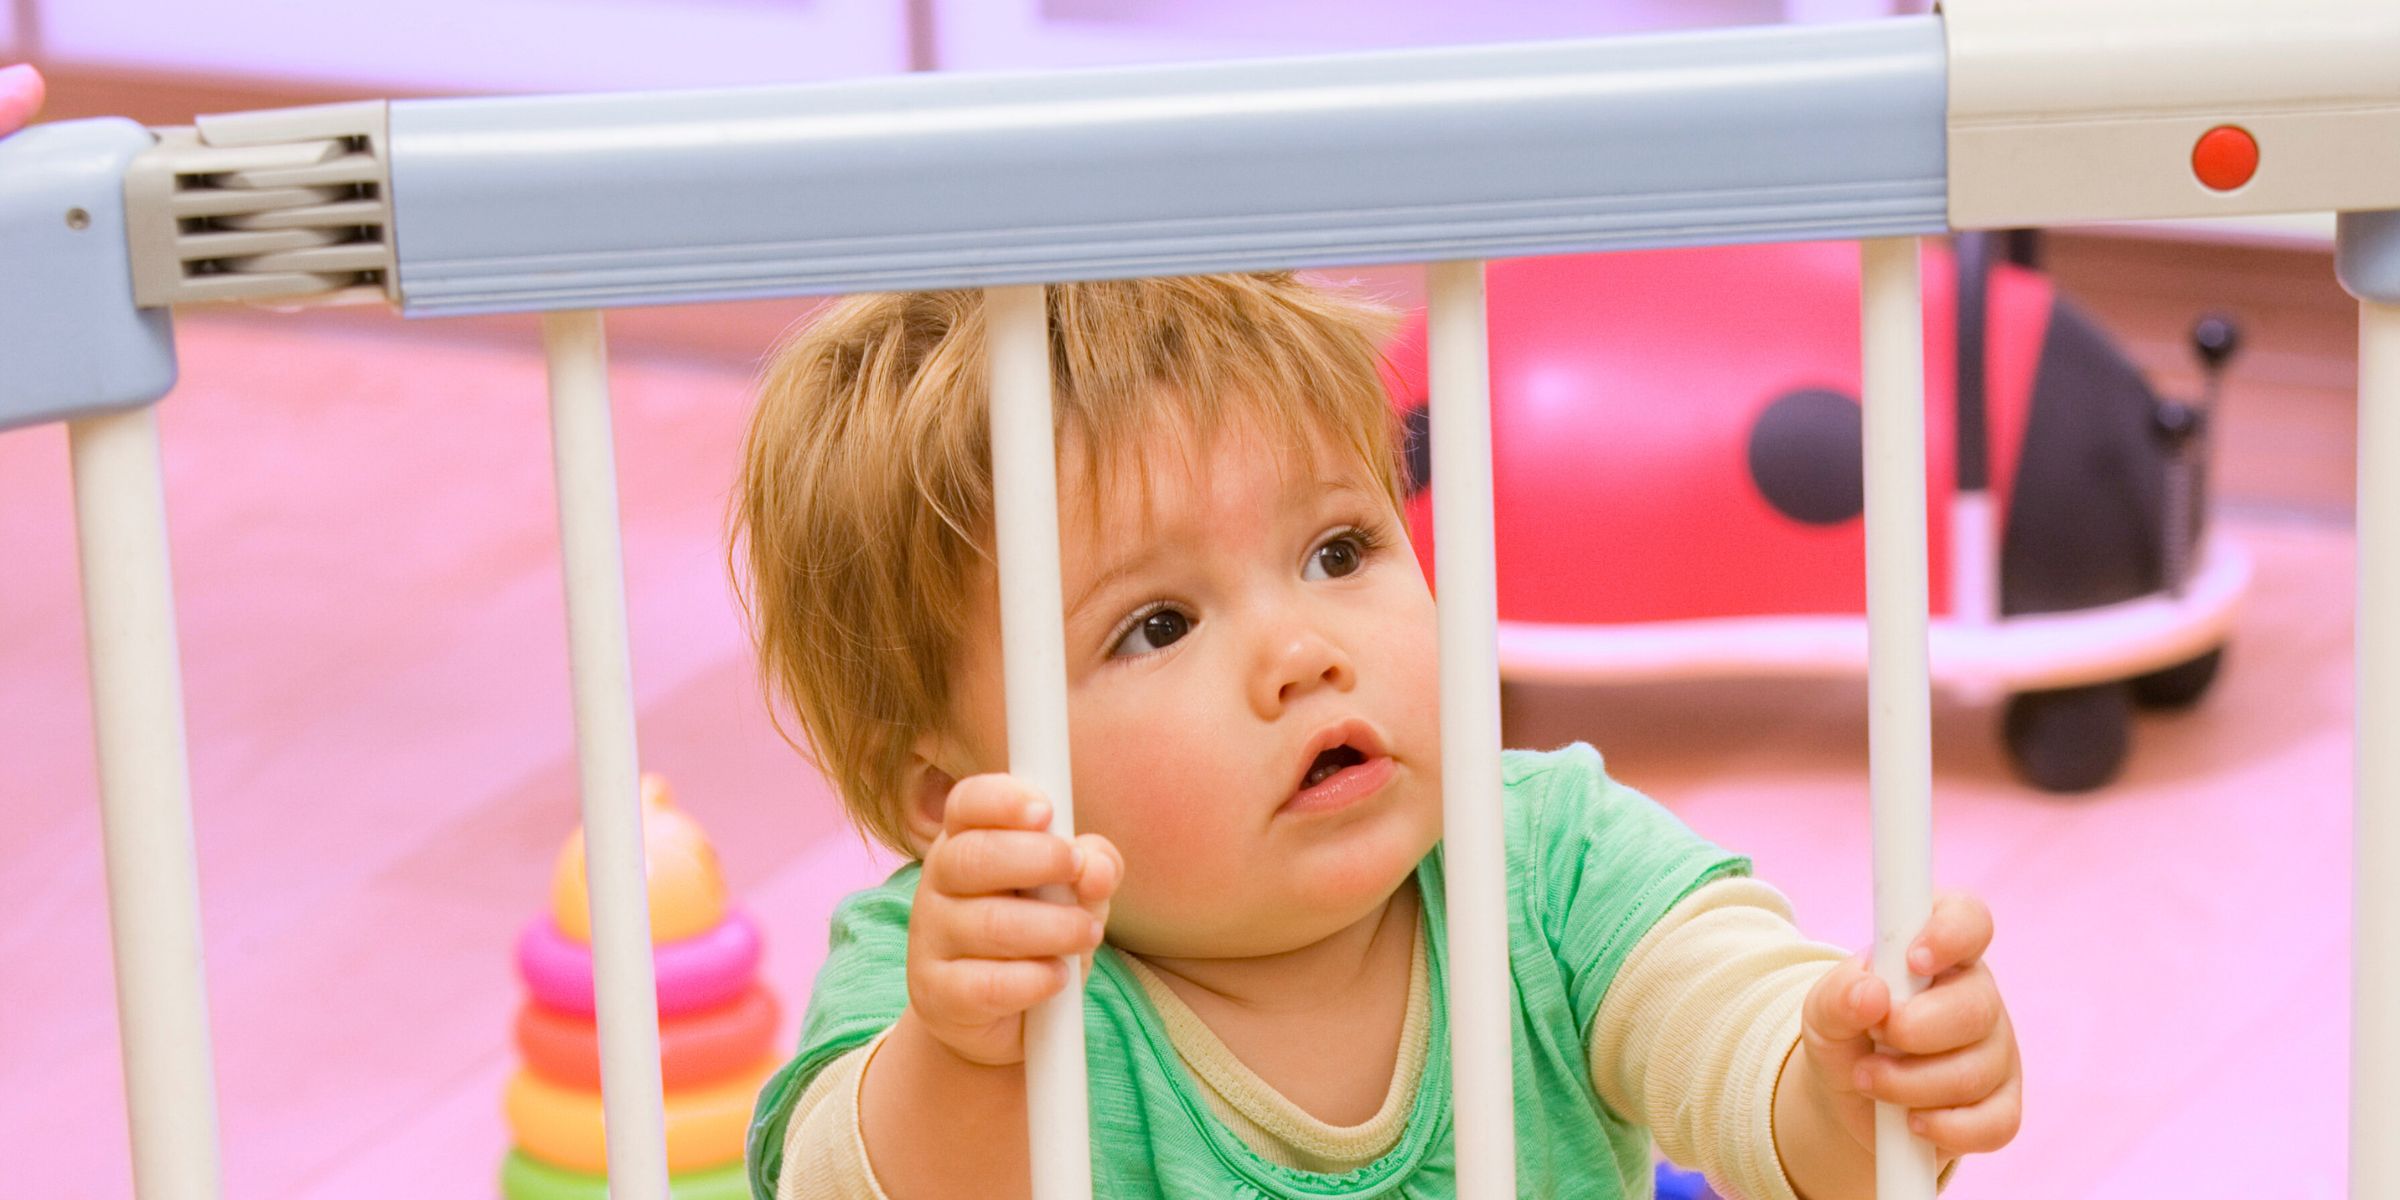 childproof and prepare your home properly with baby gates